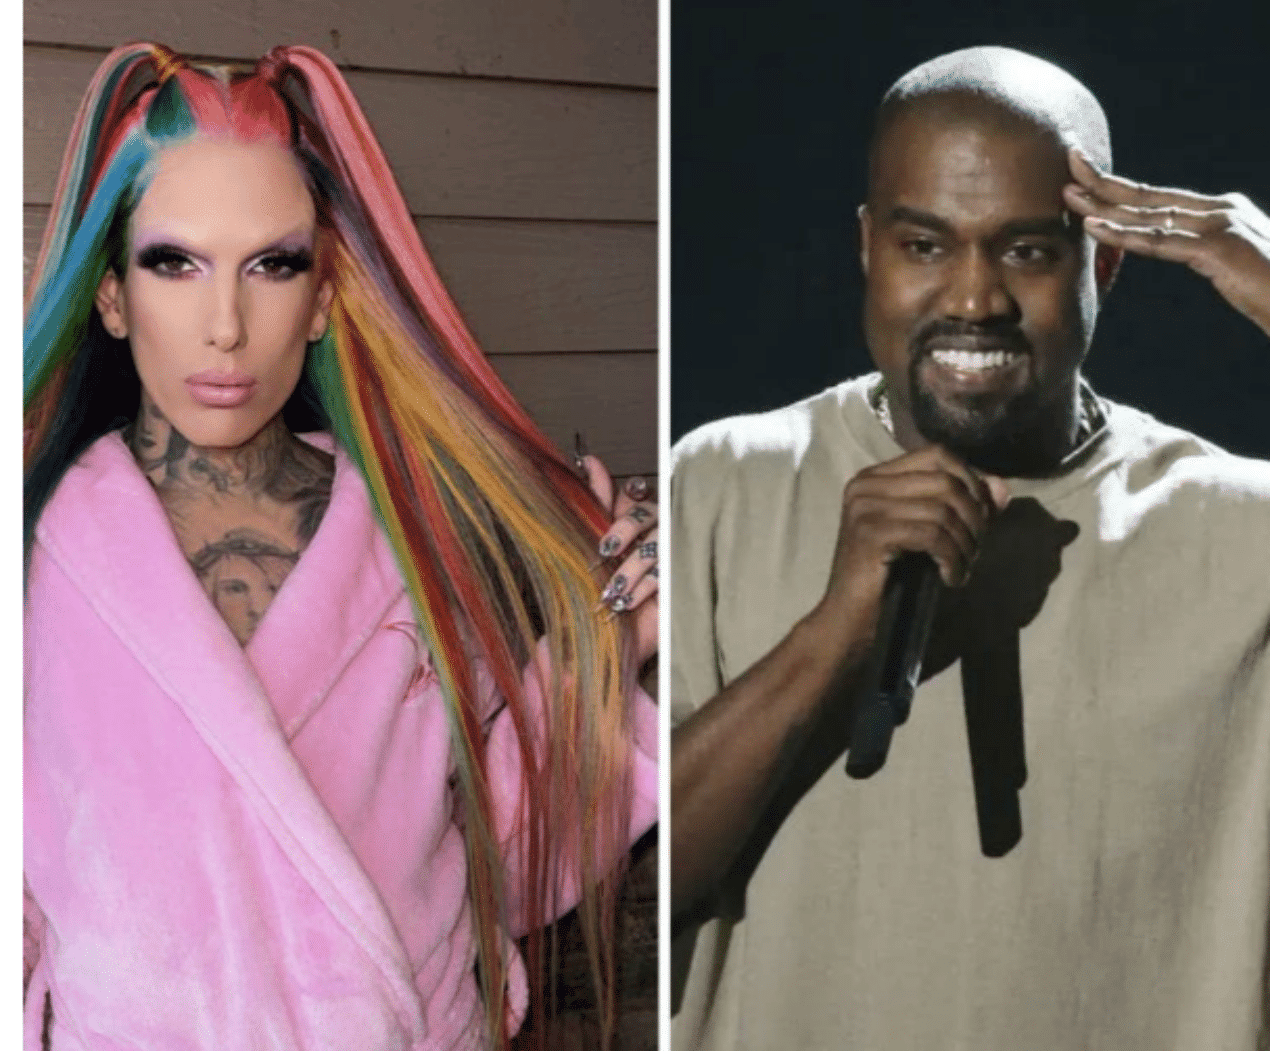 Jeffree star and Kanye west